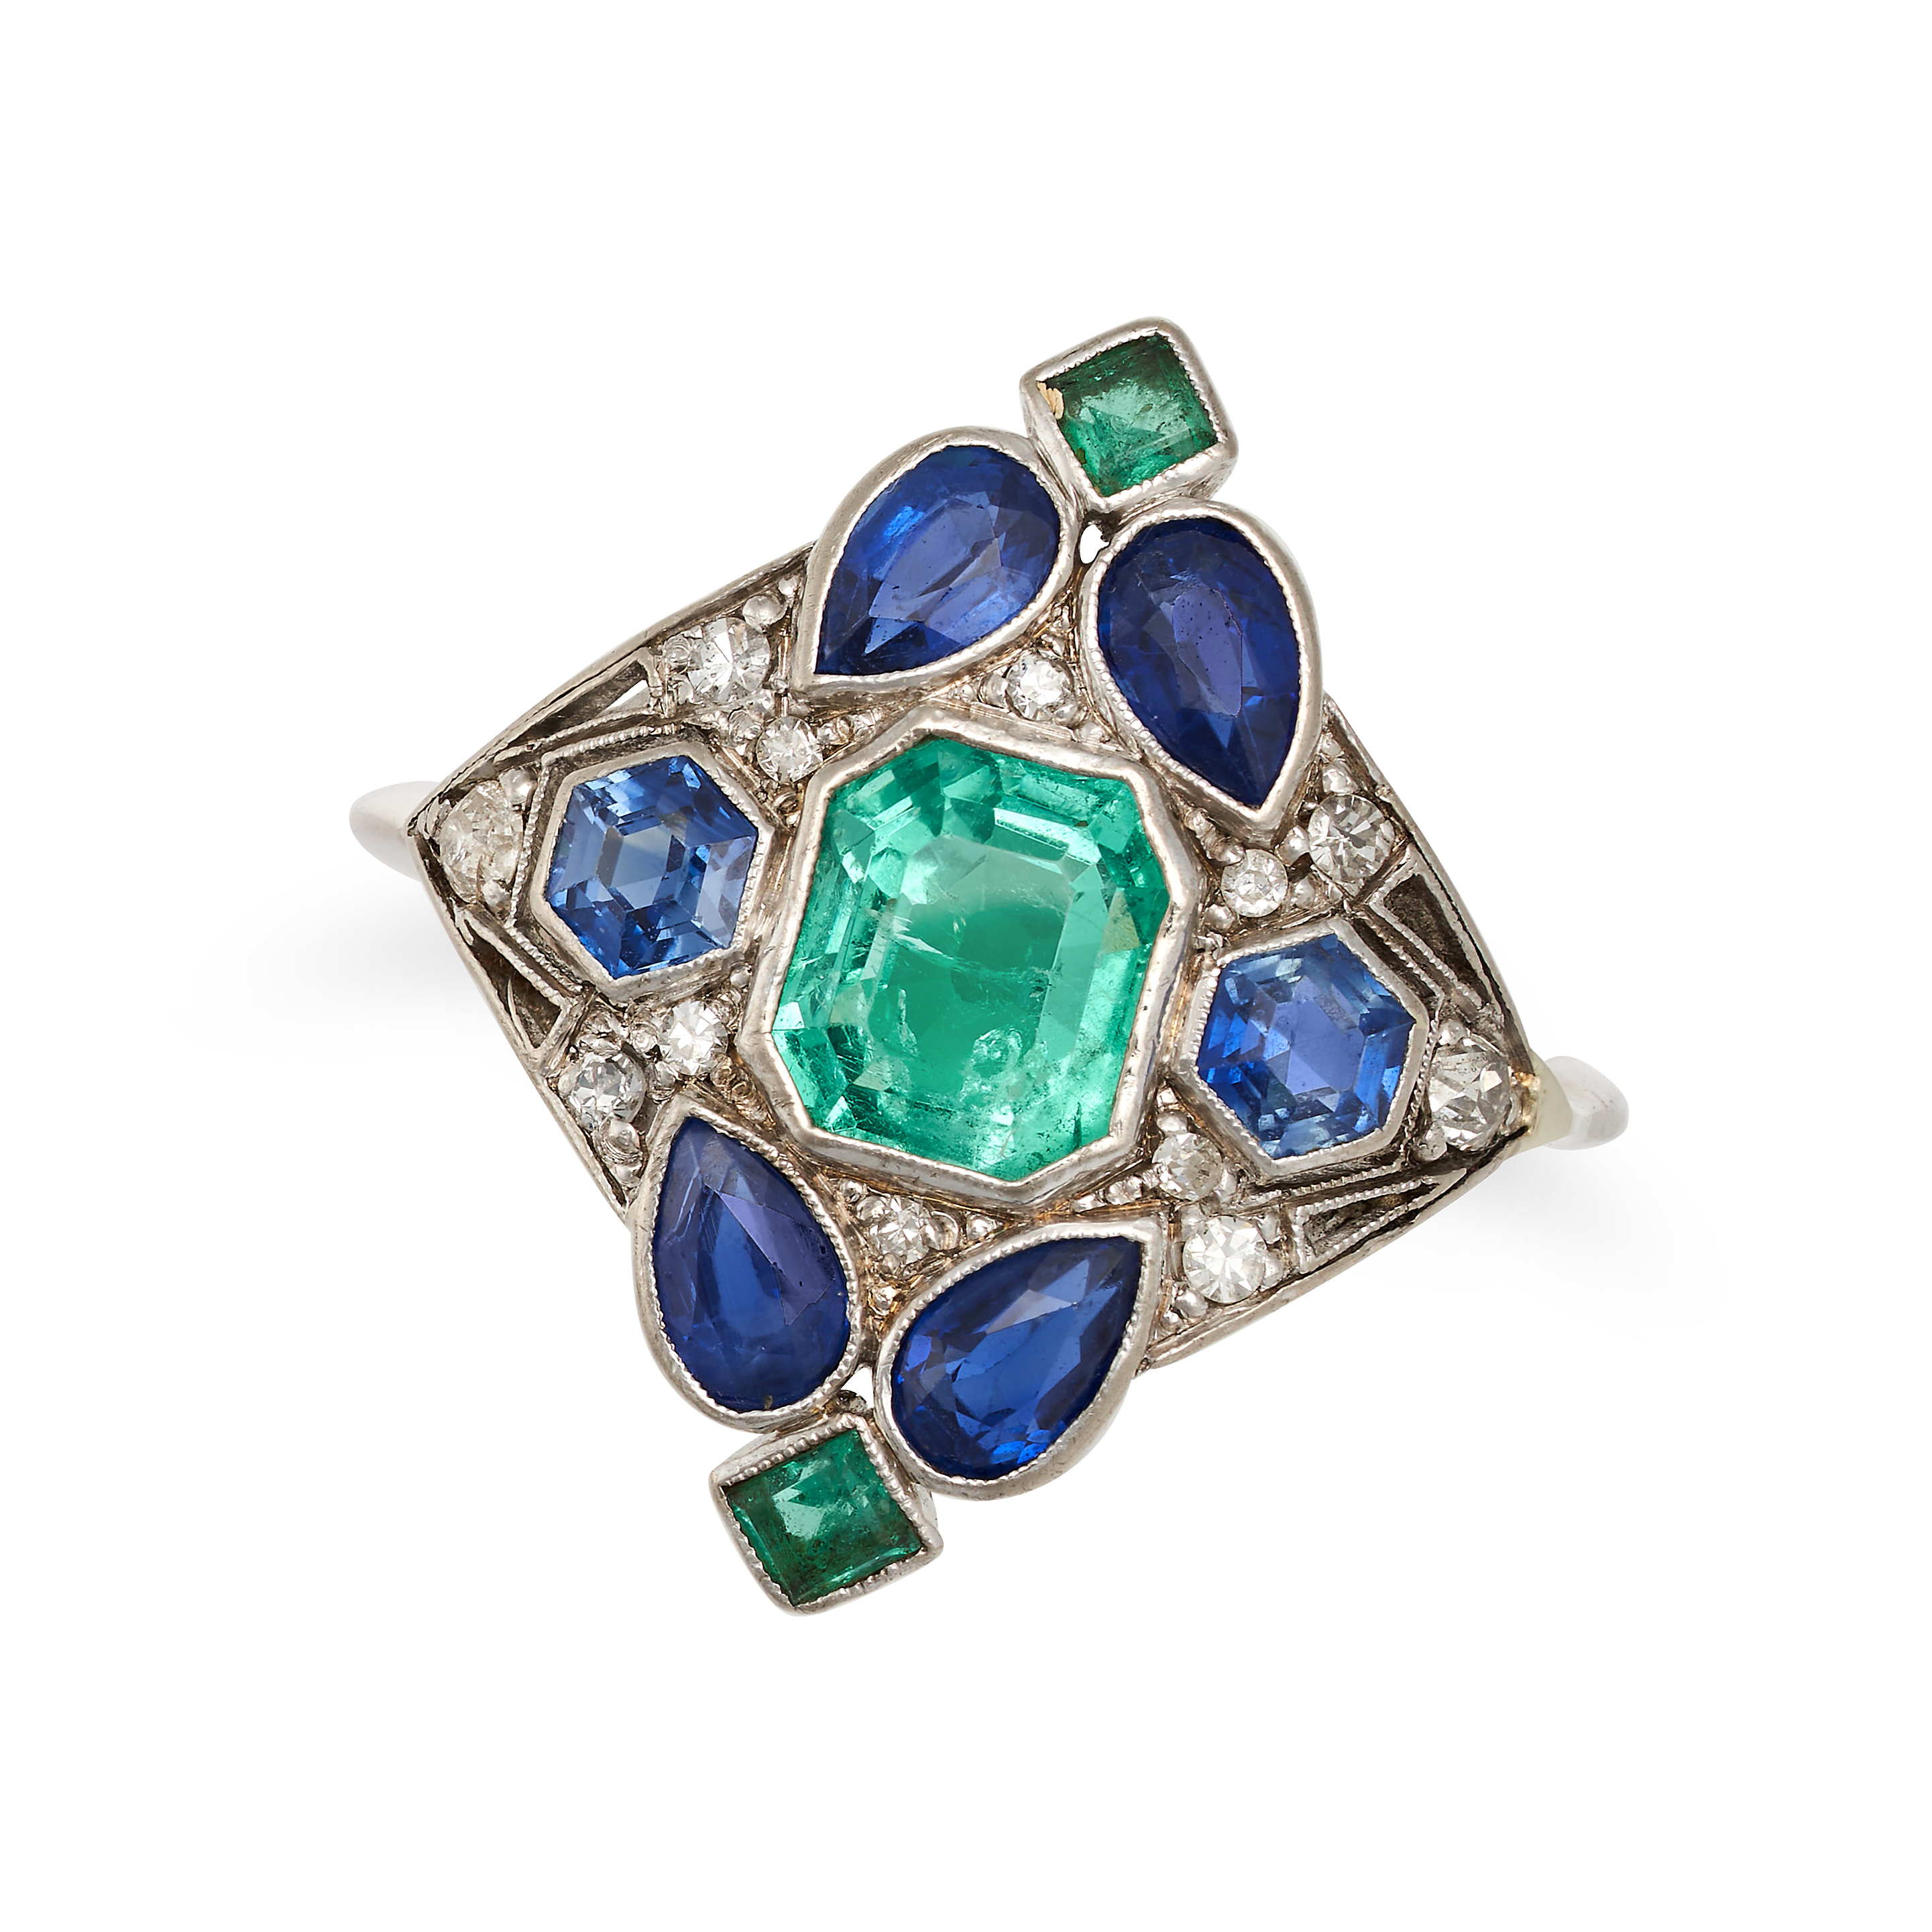 AN EMERALD, SAPPHIRE AND DIAMOND RING in white gold, set with an octagonal step cut emerald of ap...